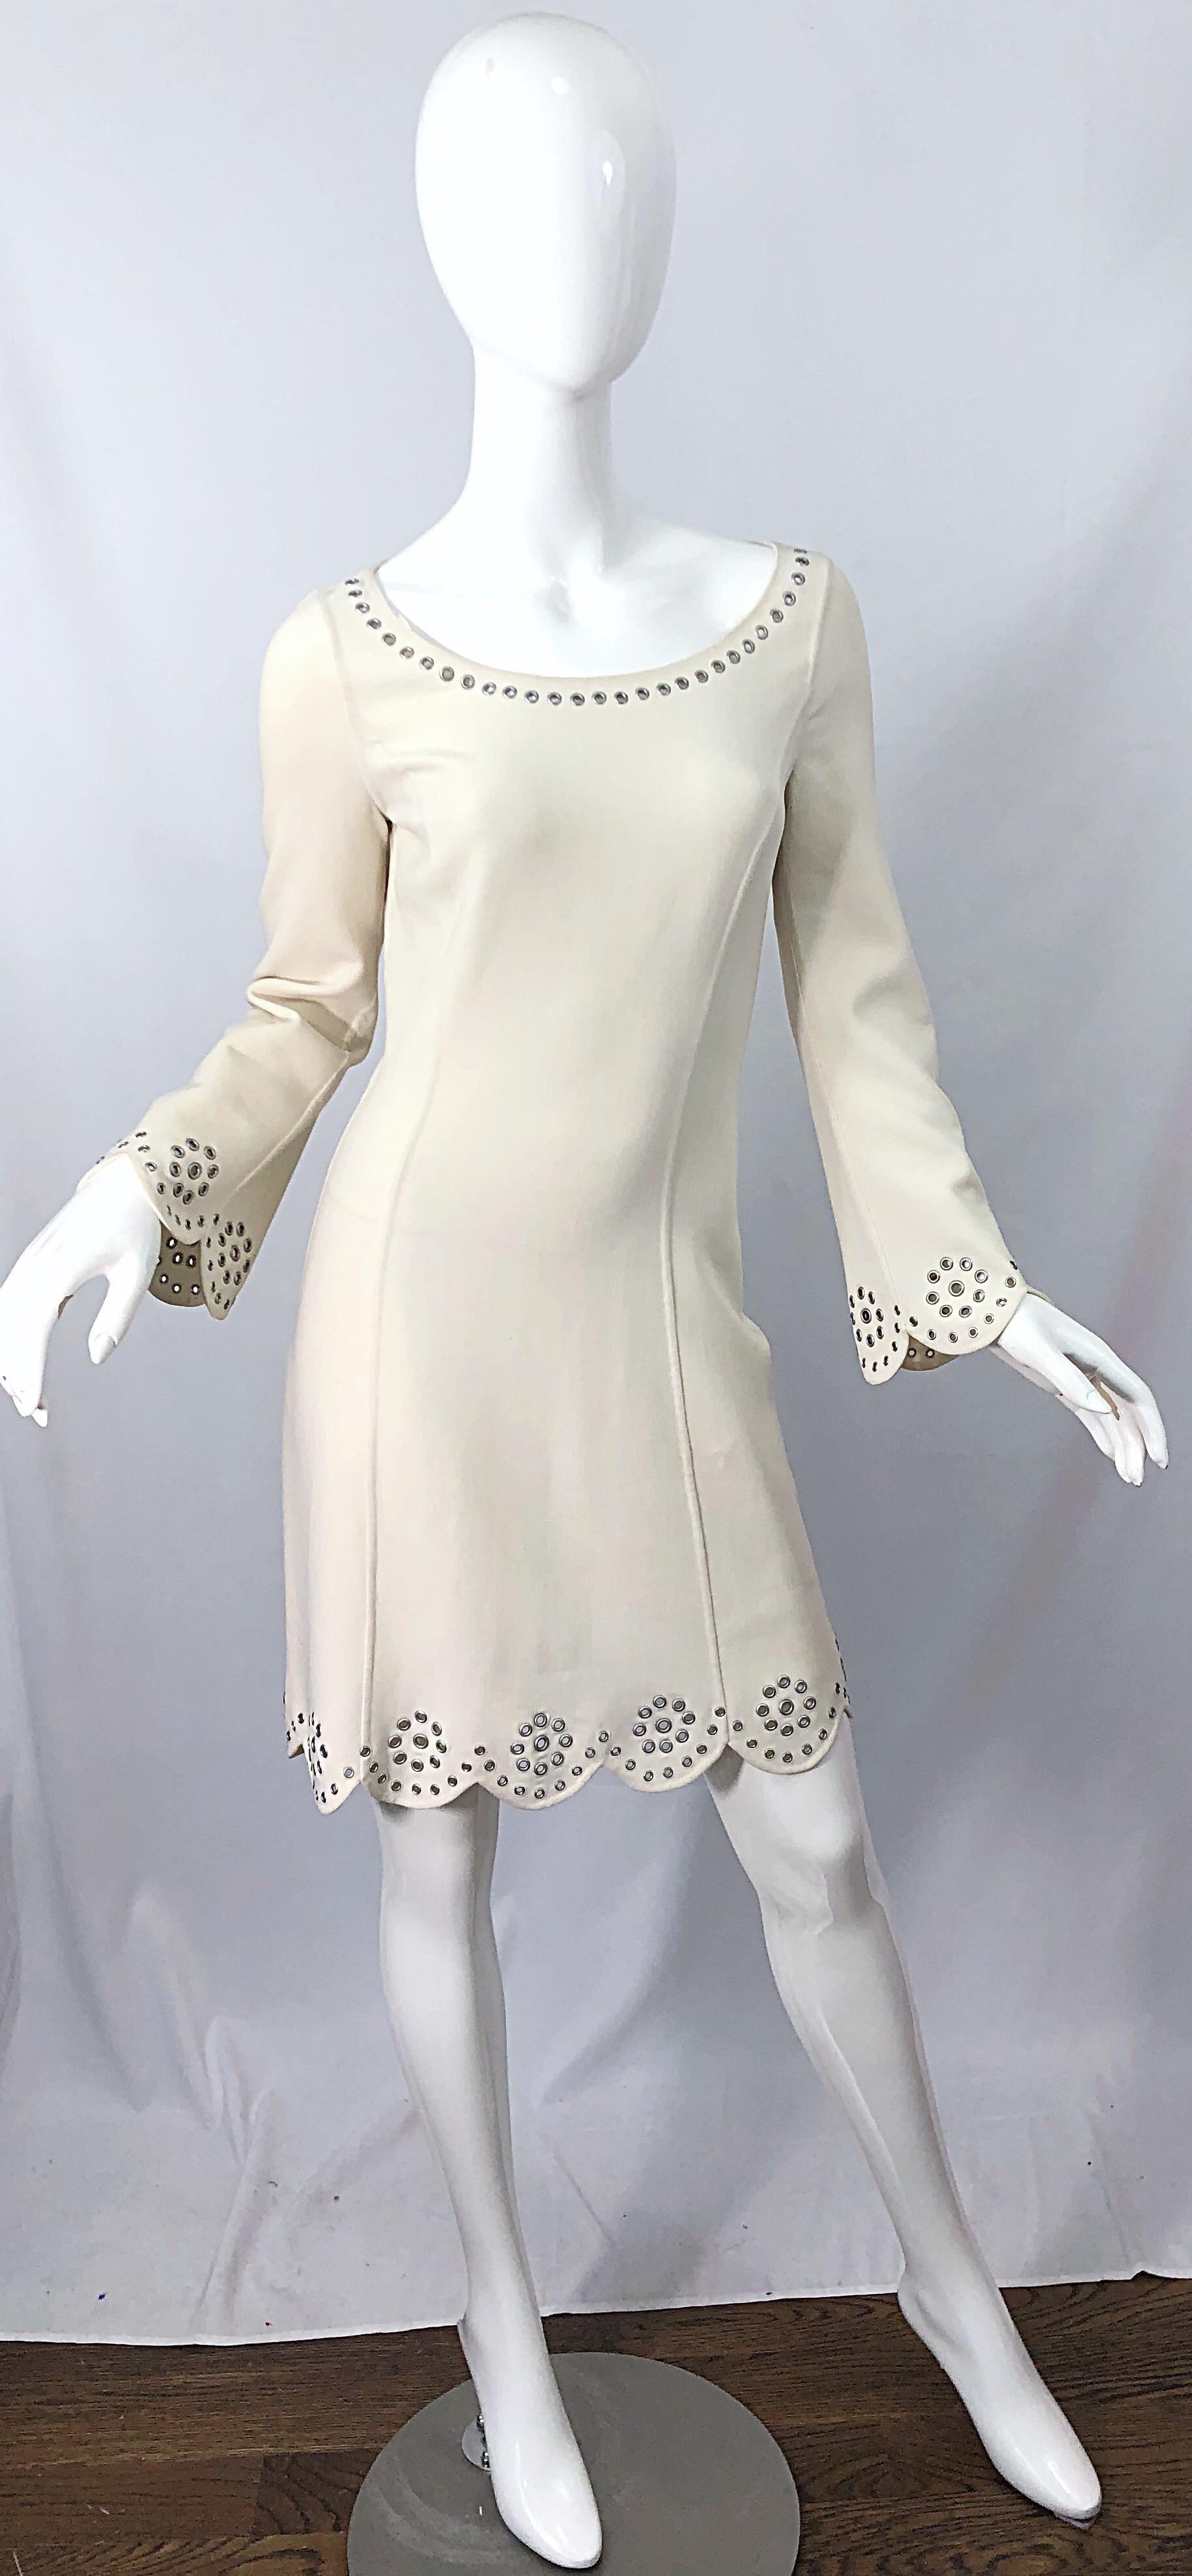 Early 2000s vintage MICHAEL KORS COLLECTION off-white / ivory long bell sleeve grommet dress ! Features a tailored bodice with silver grommets around the neck, scalloped hem, and scalloped bell sleeves. Hidden zipper up the side with hook-and-eye